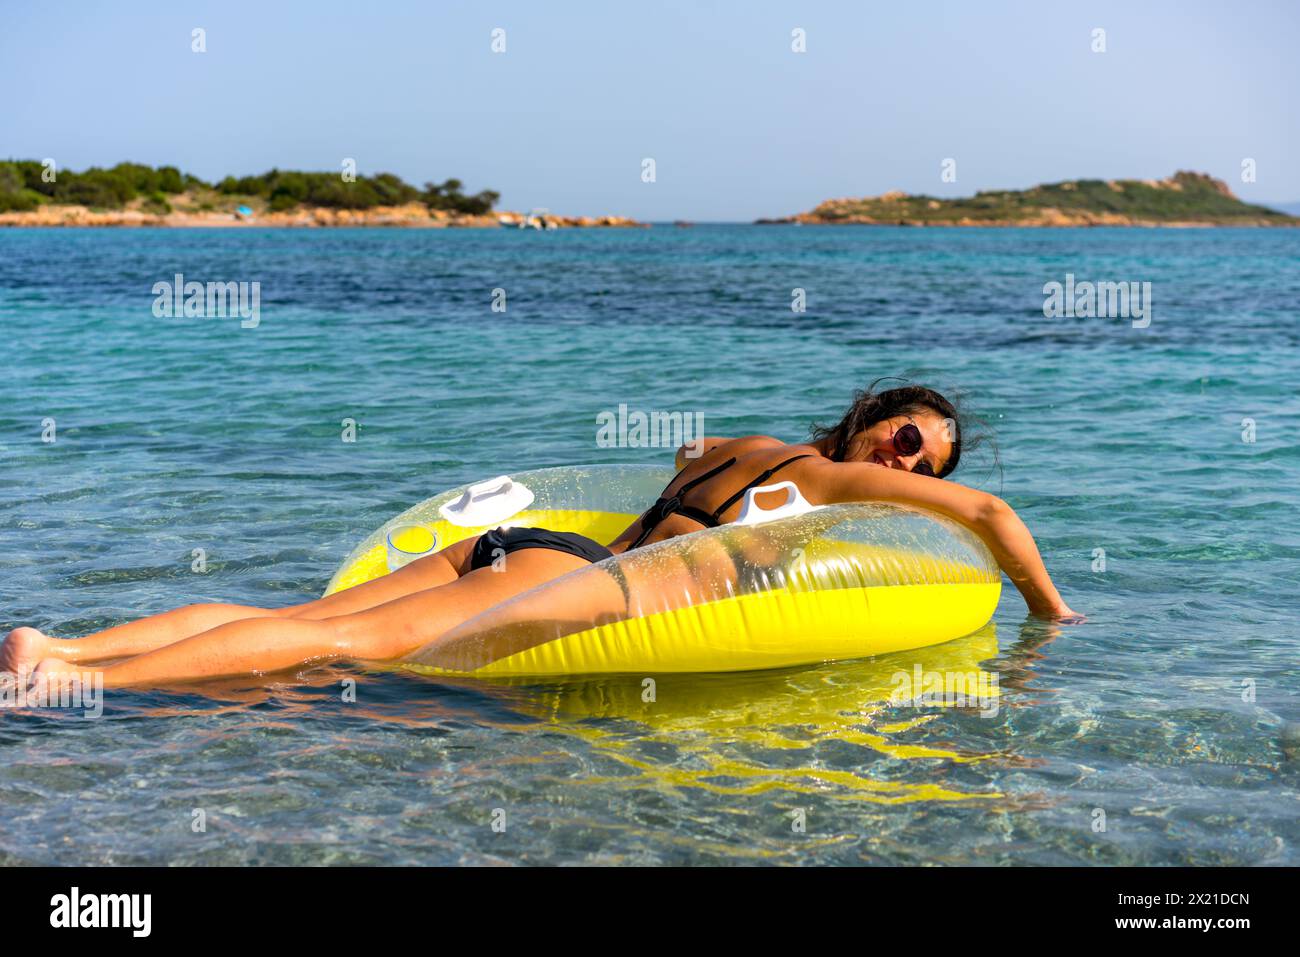 Back view of a woman on a donut inflatable pillow on turquoise water Stock Photo